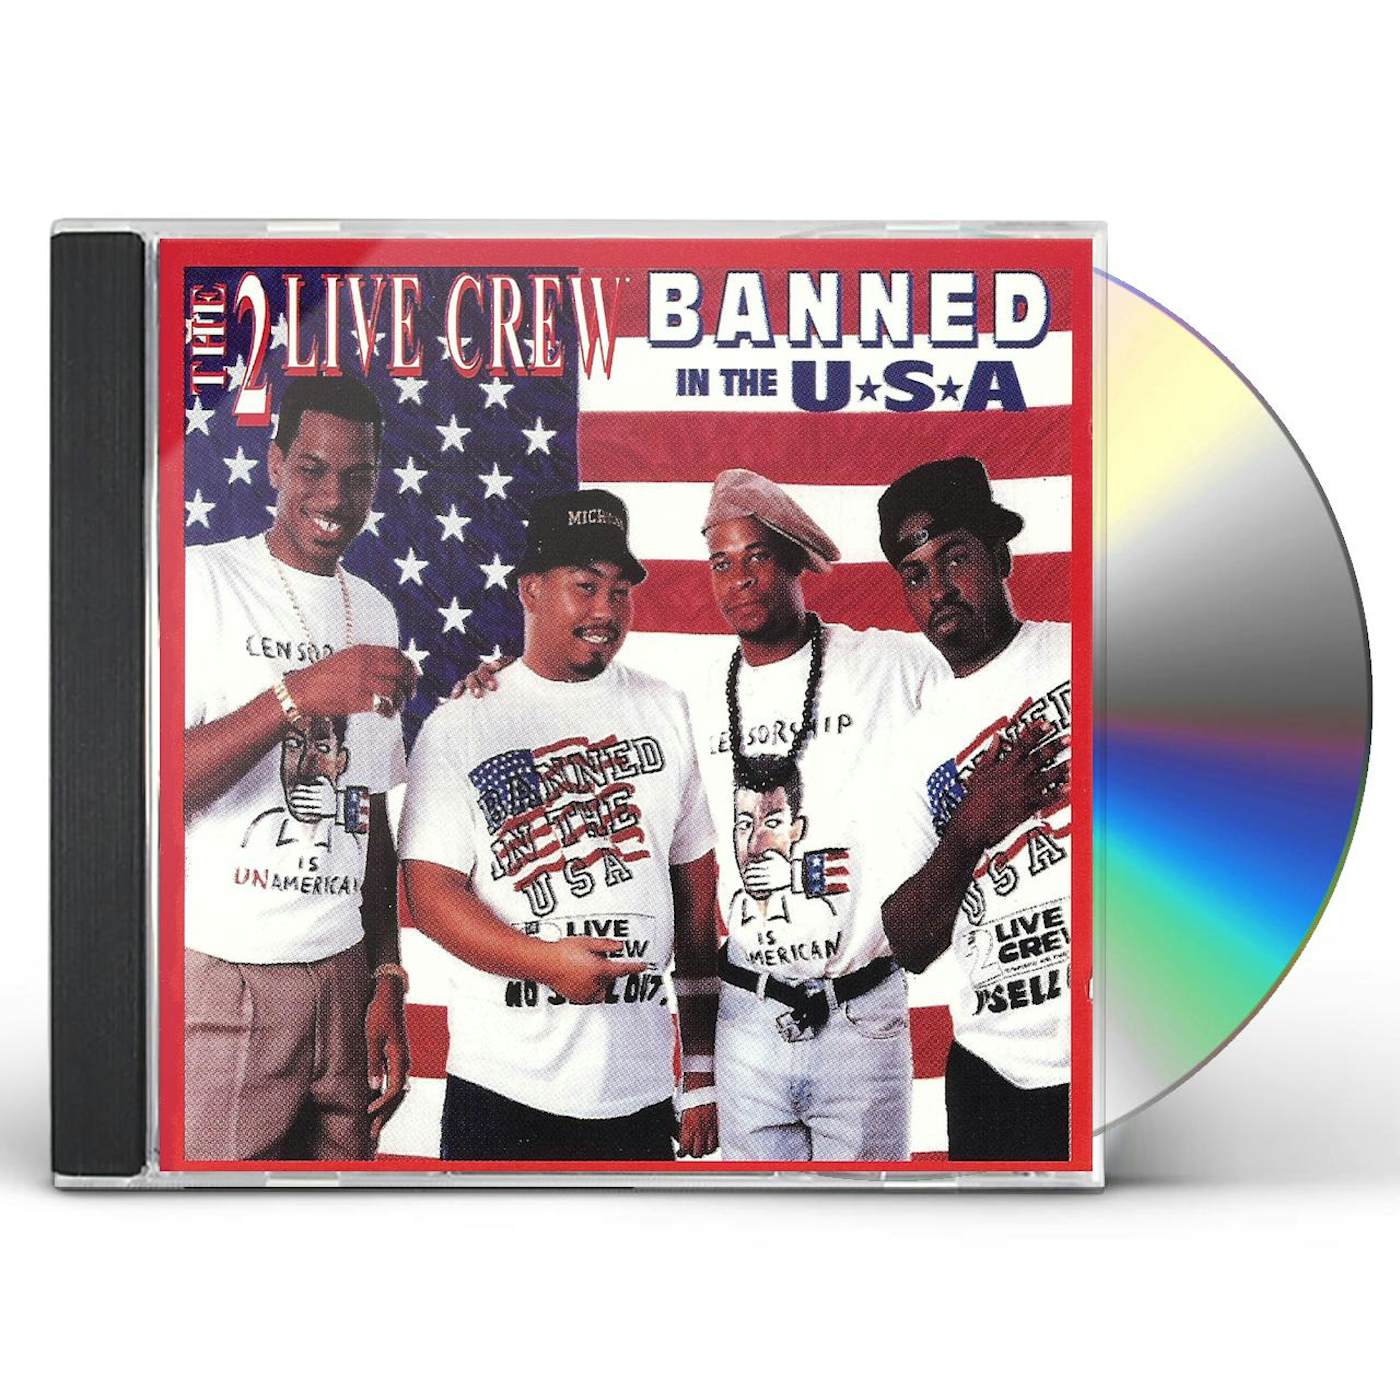 2 LIVE CREW BANNED IN THE USA CD